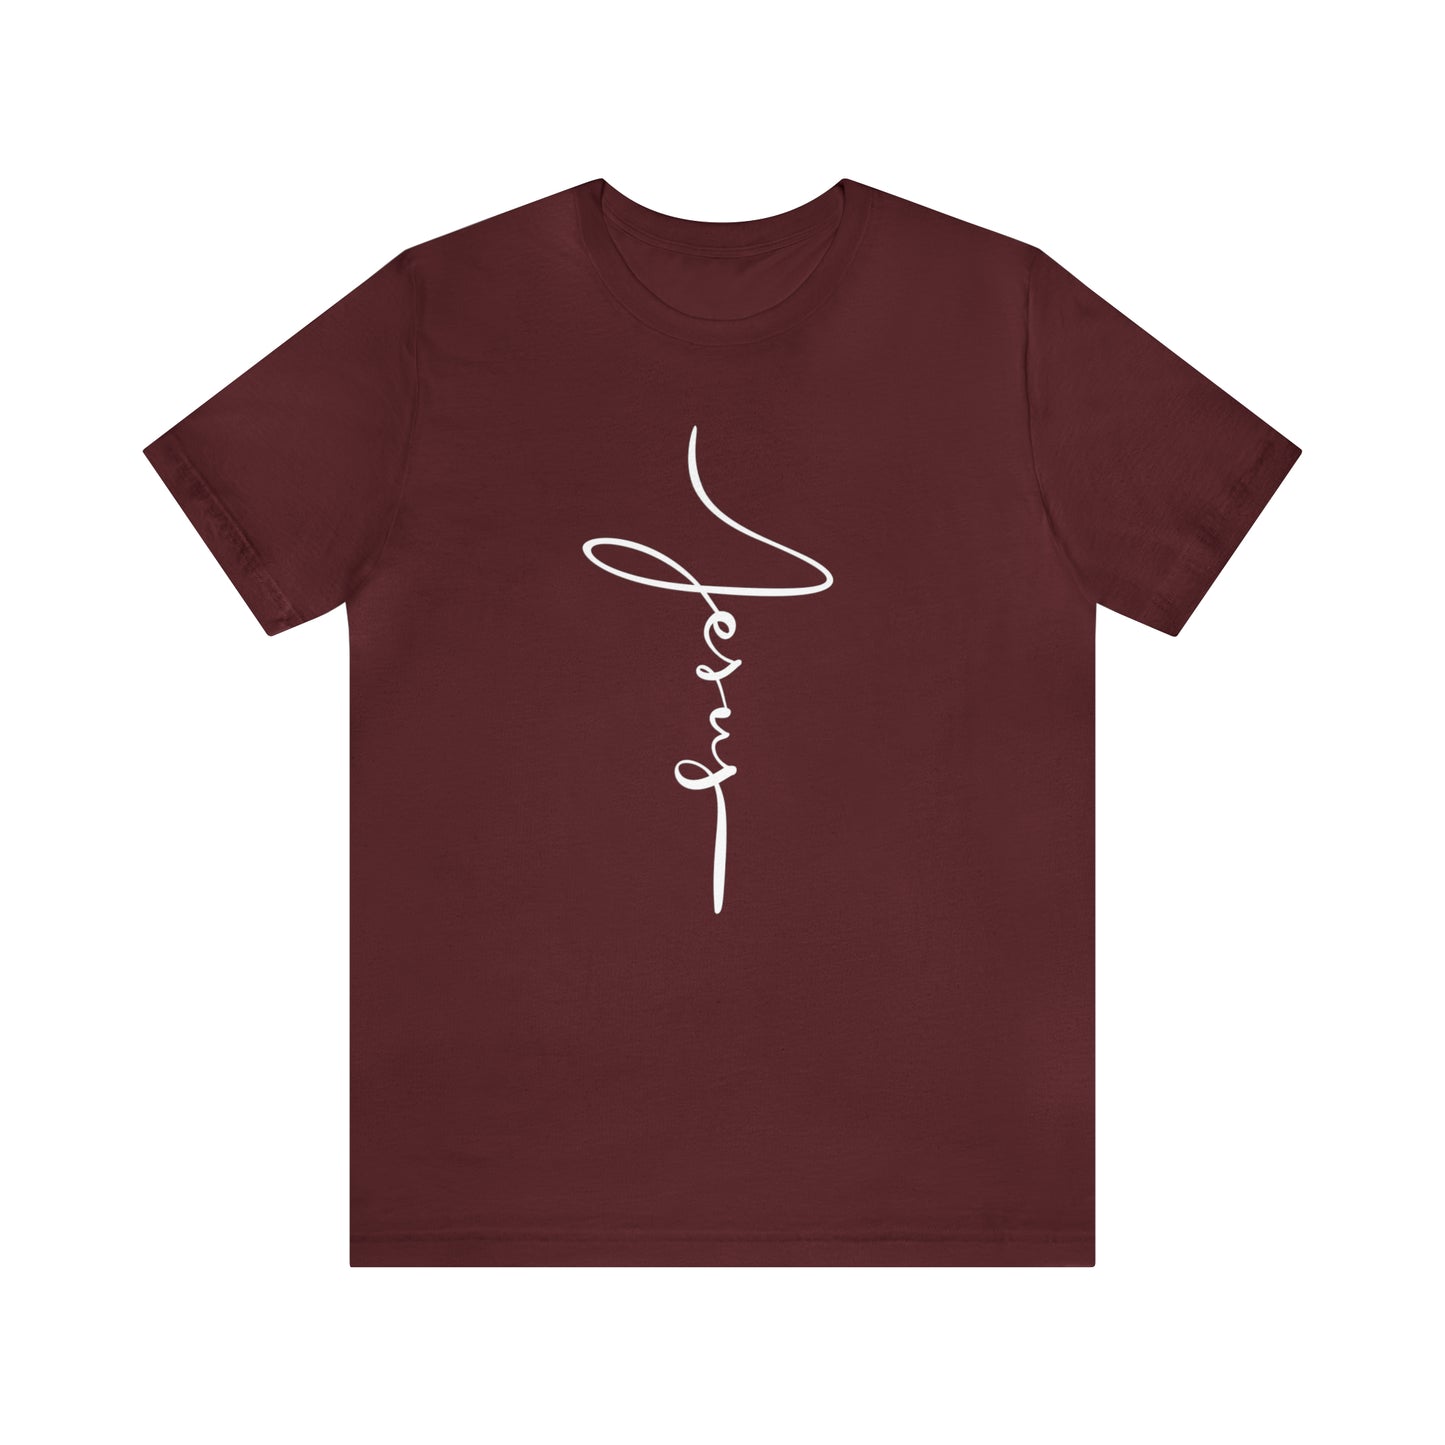 Jesus Cross Christian T-Shirt - Cursive White Font Bright Color Tees - Maroon on white background